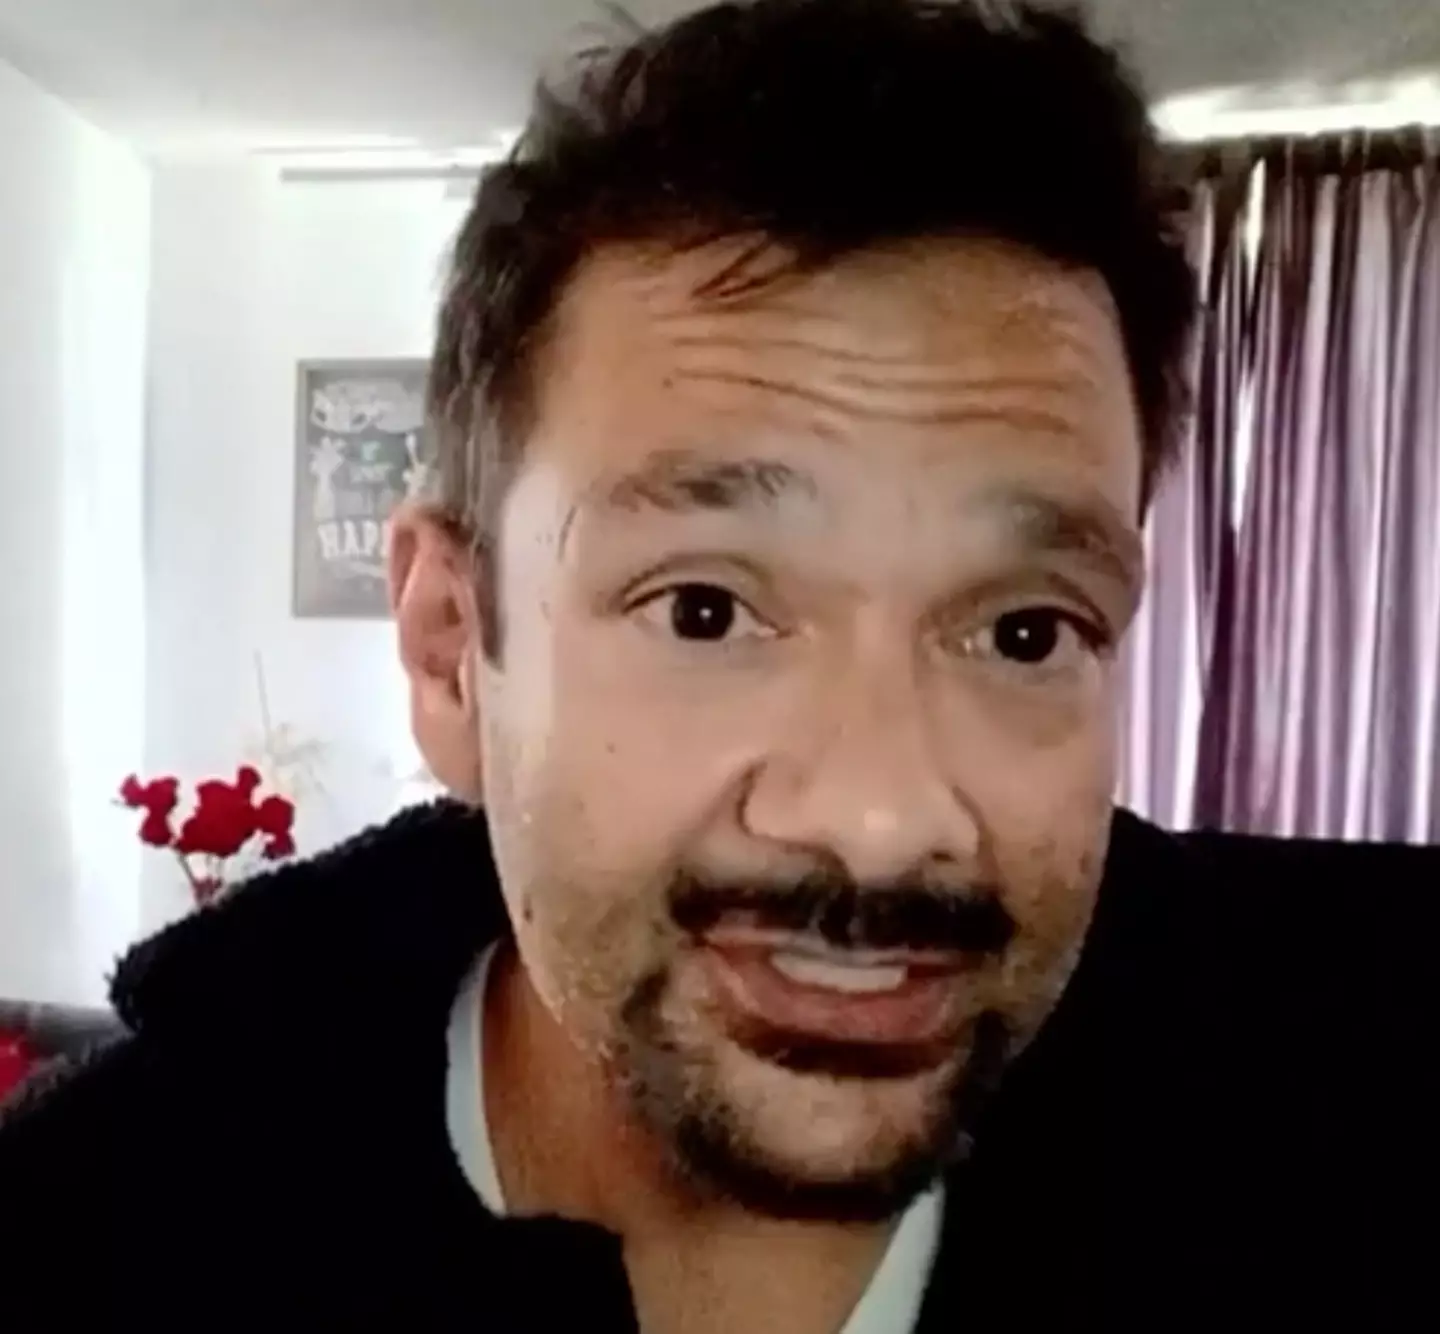 Shaun Weiss has opened up about his addiction and road to recovery.